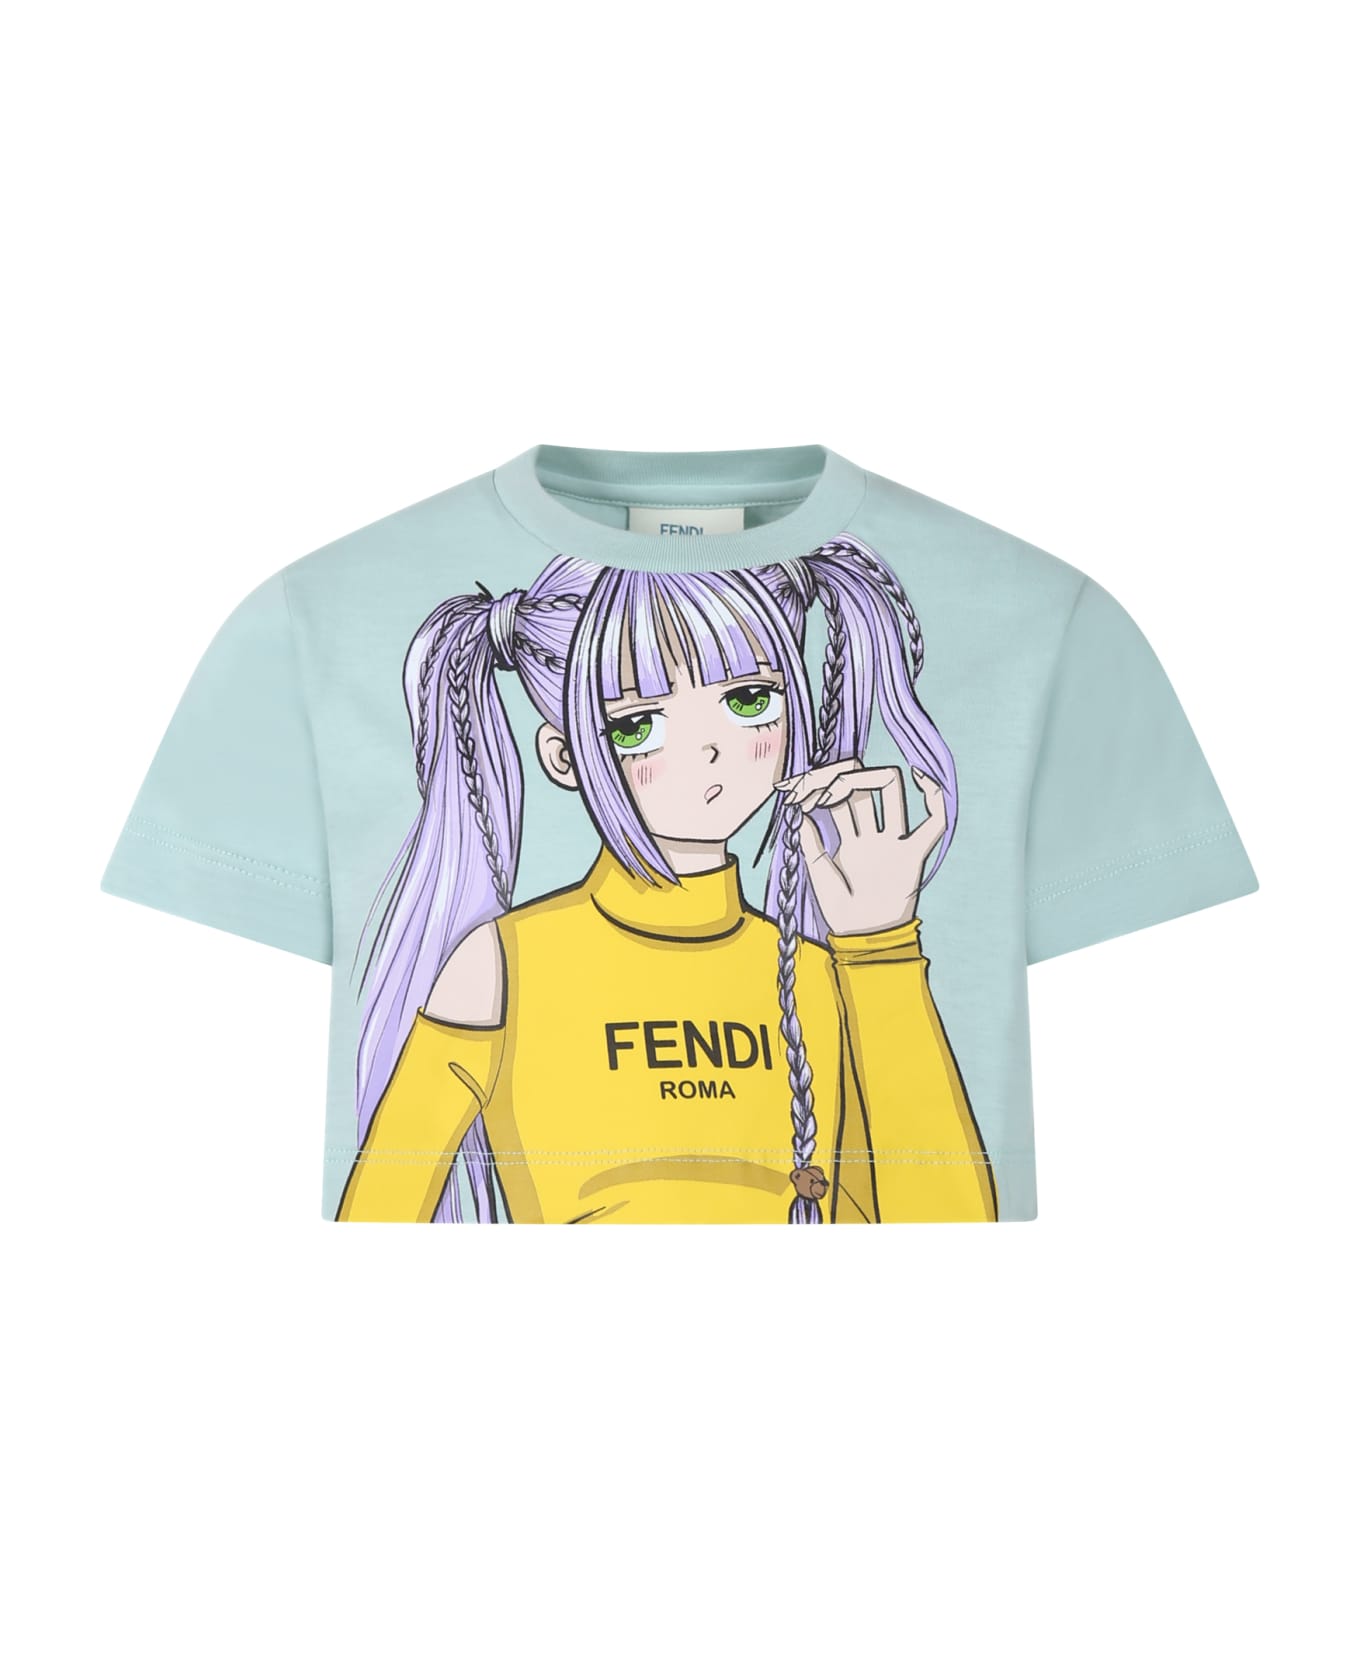 Fendi Green T-shirt For Girl With Printed Girl - Green